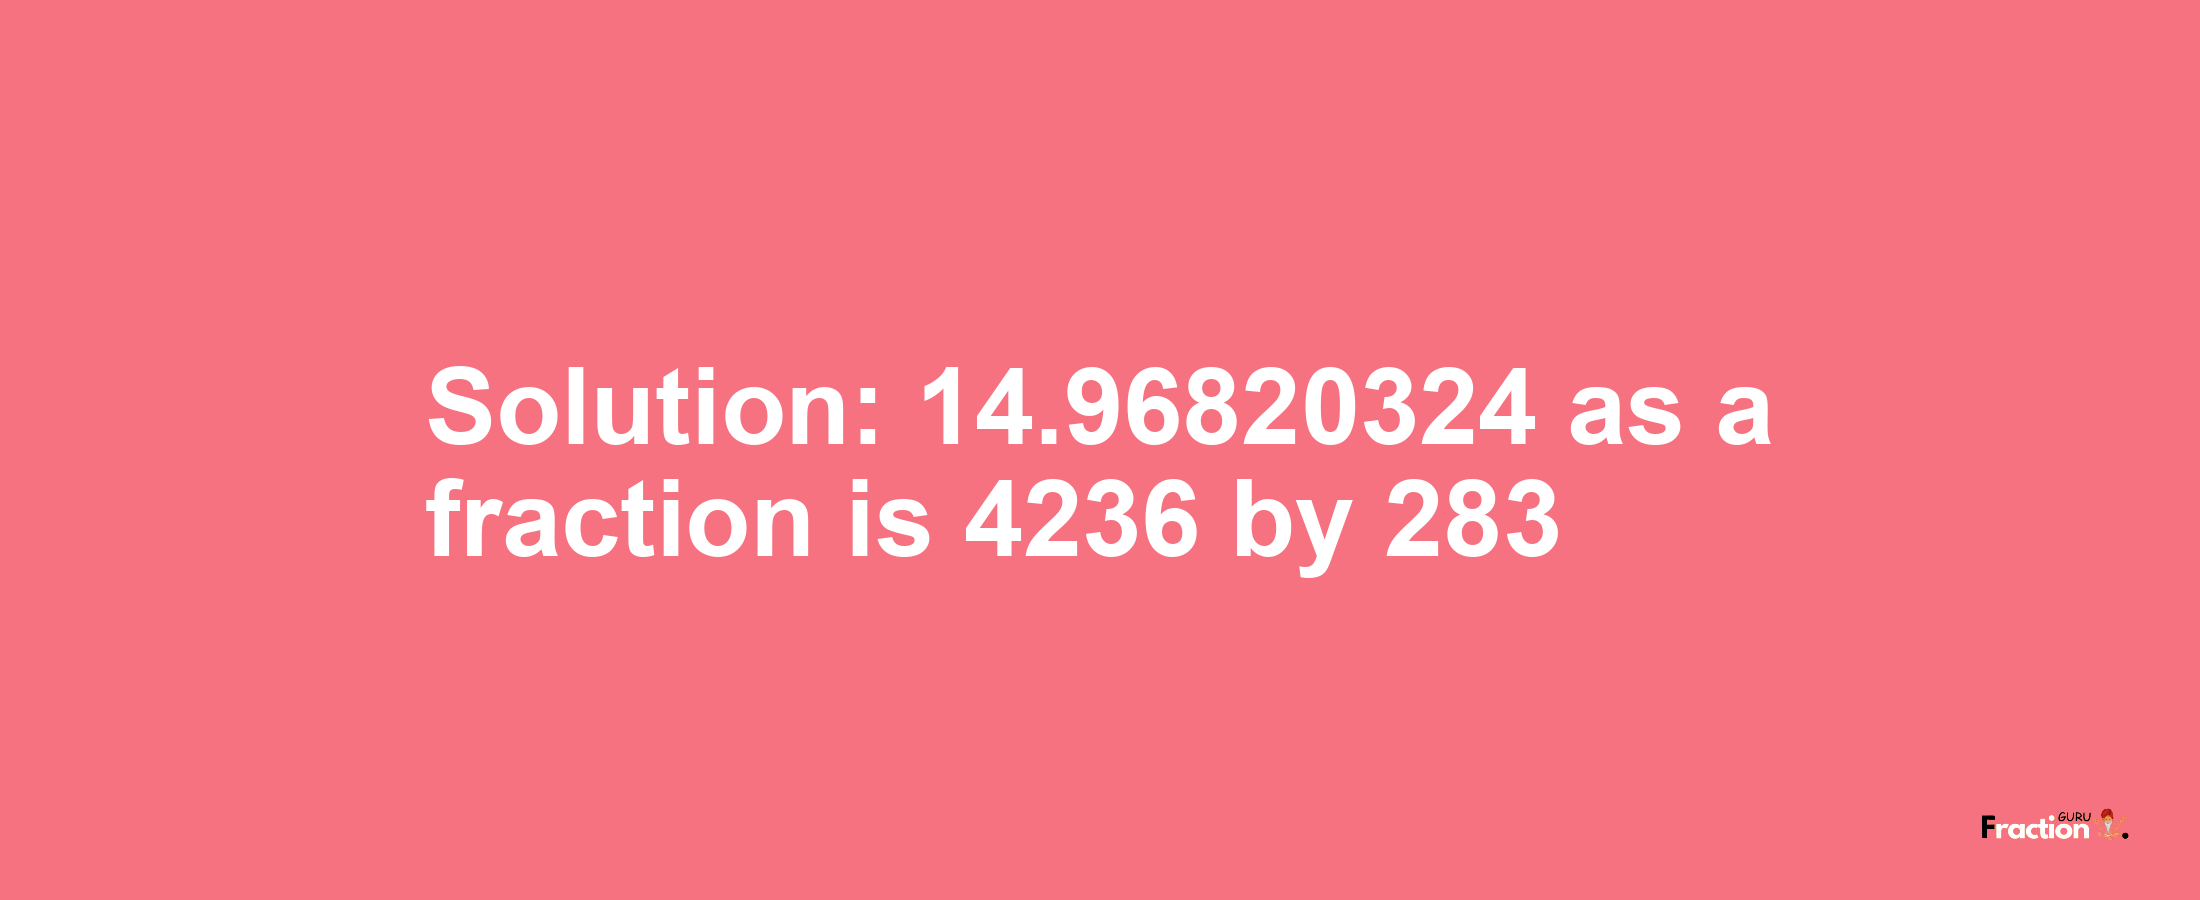 Solution:14.96820324 as a fraction is 4236/283